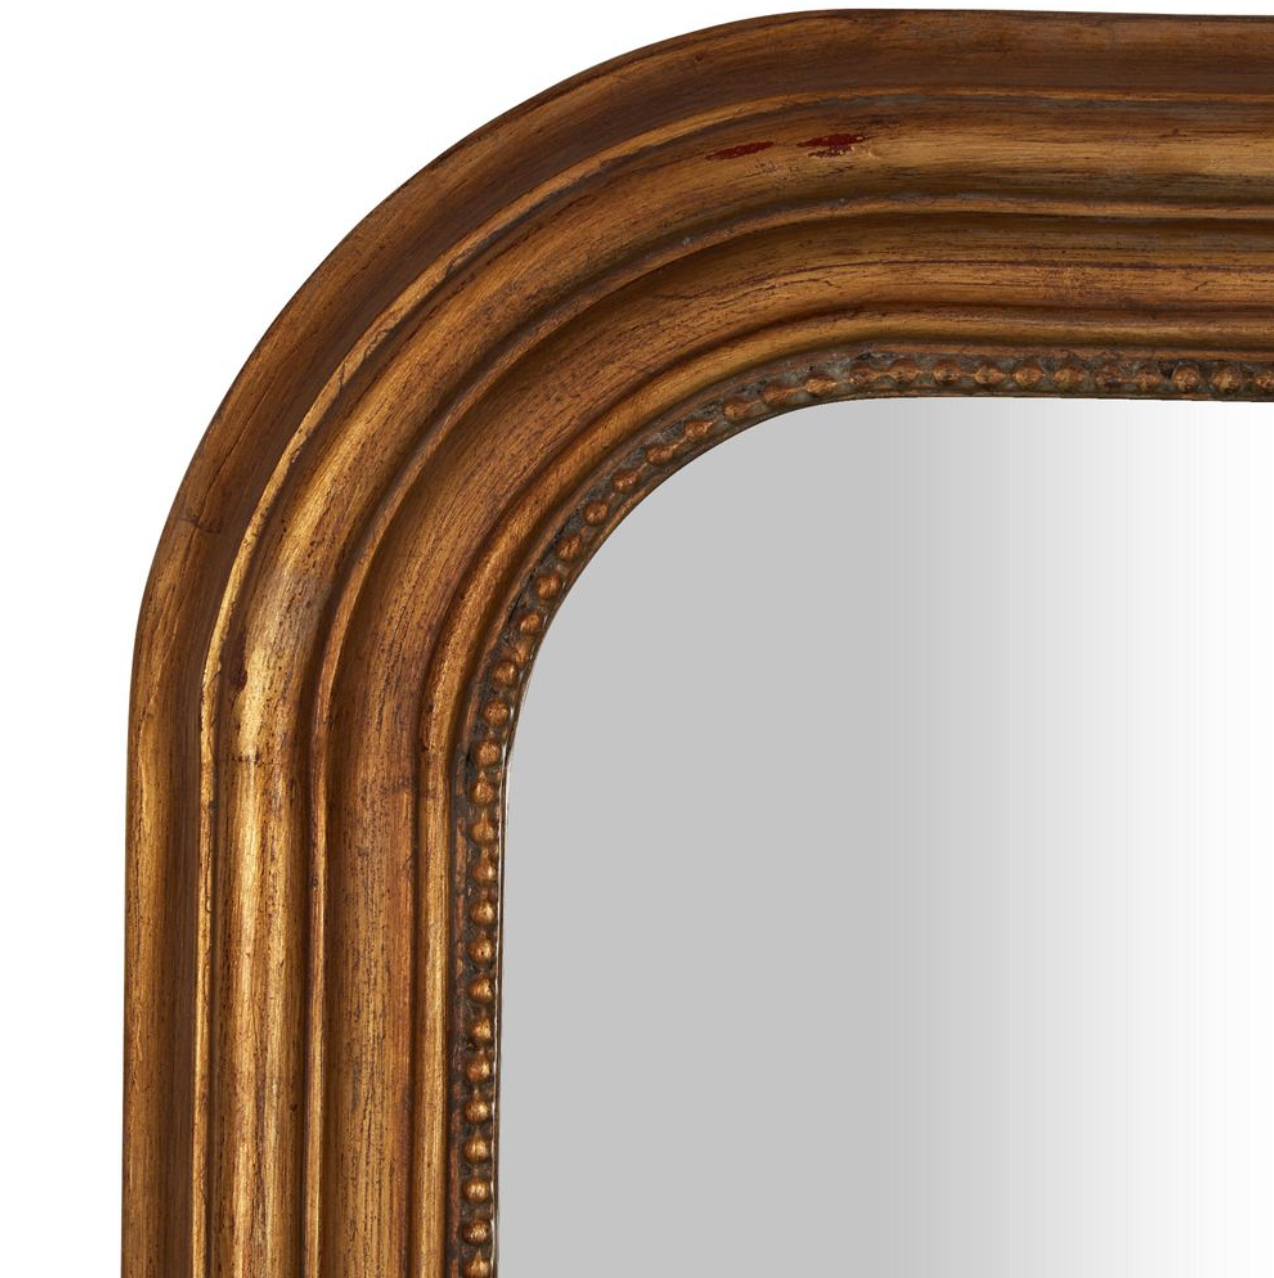 Elongated Arch Mirror